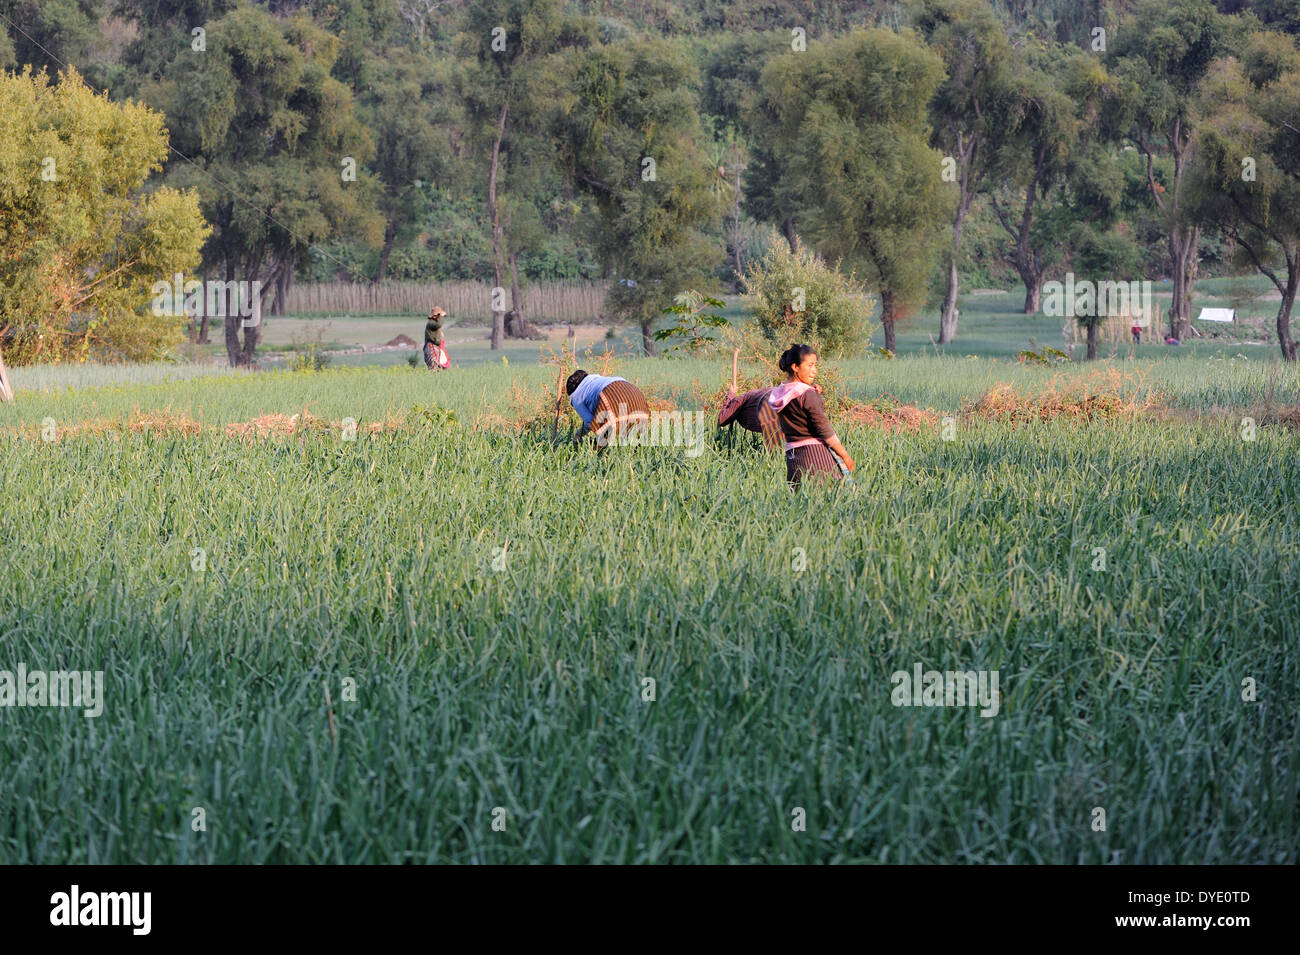 Woment tend onions growing in a terraced, irrigated field on the banks of Rio Panajachel. Stock Photo